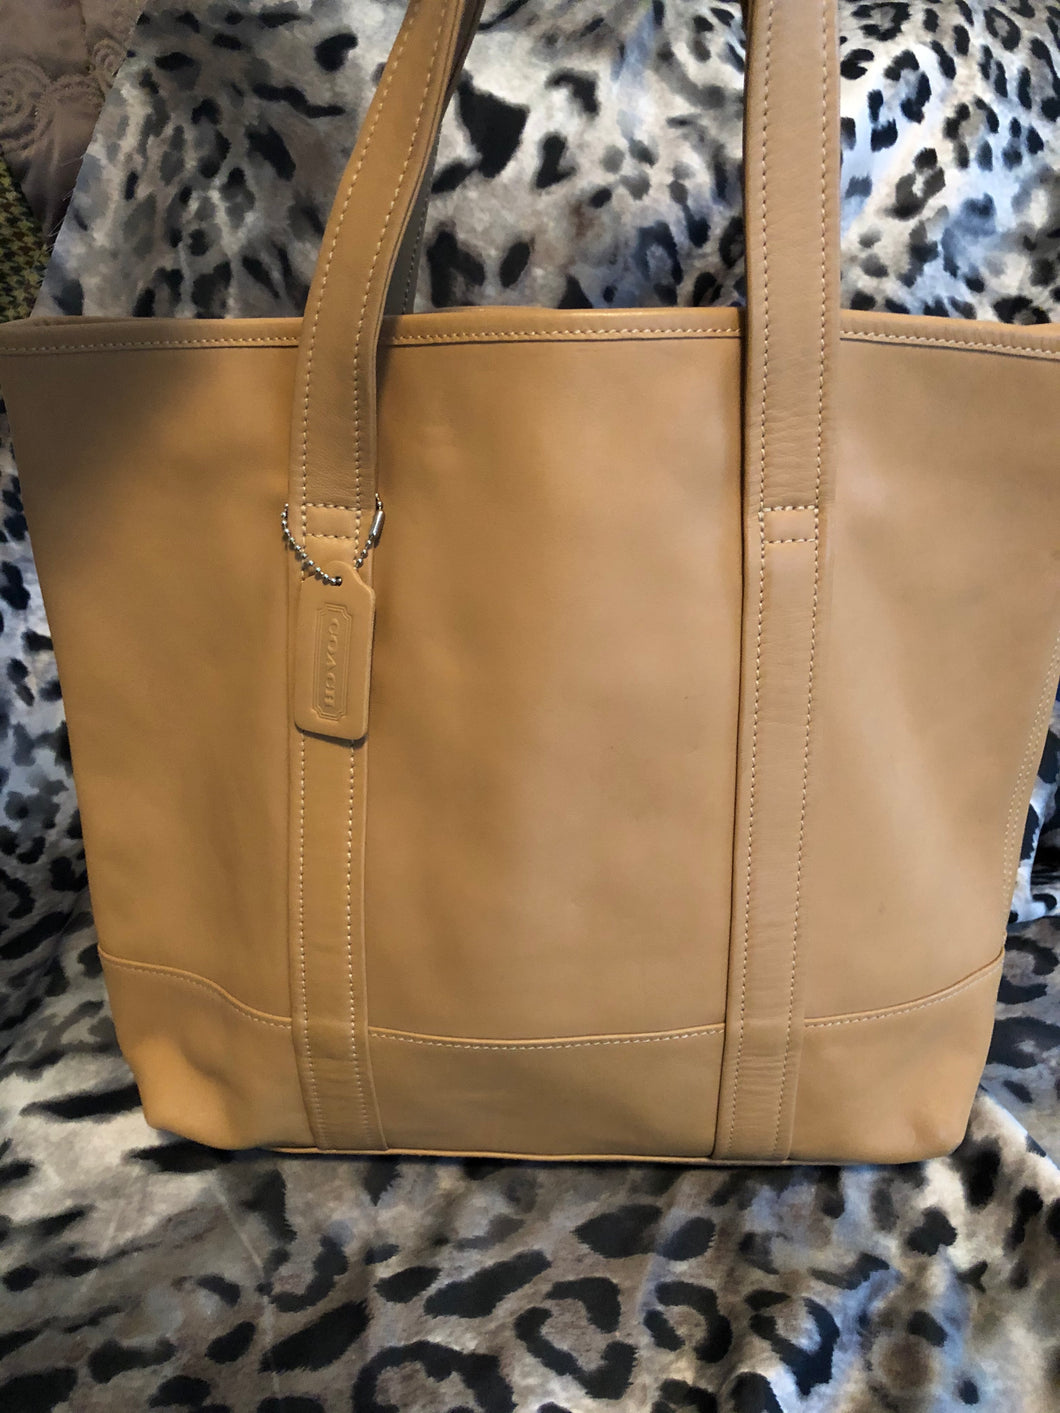 consignment bag - Coach tote